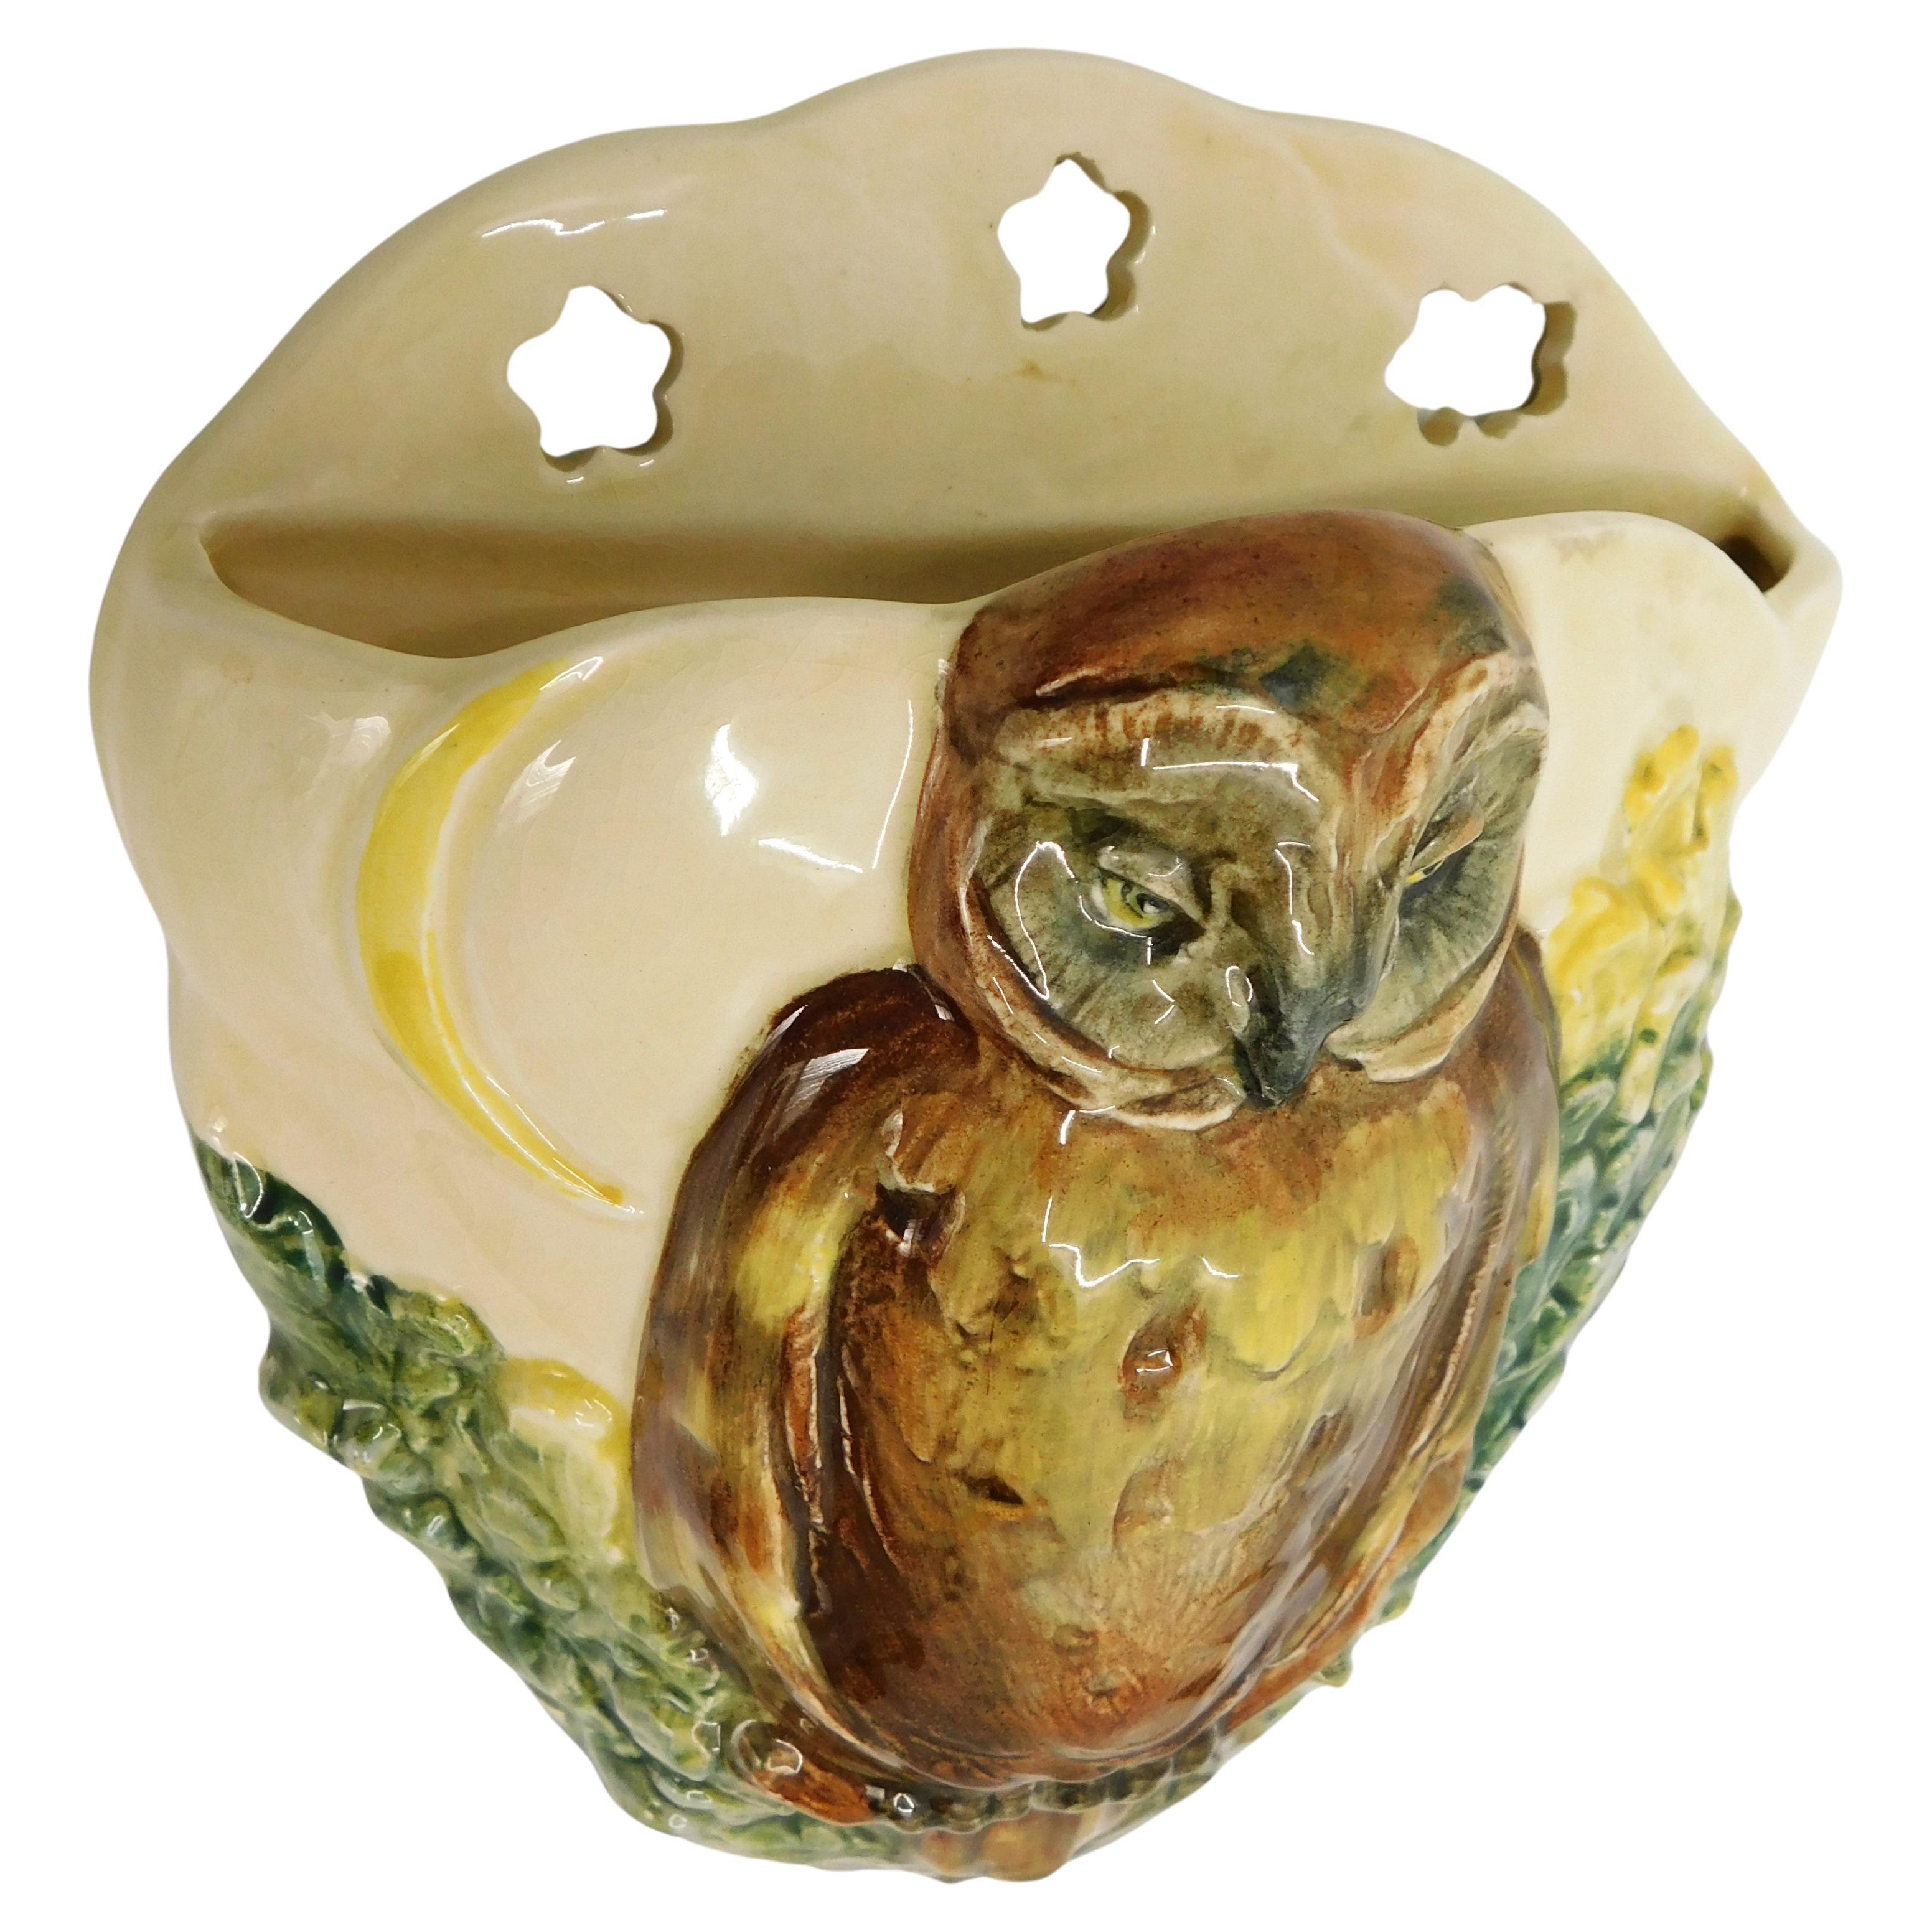 Circa 1930 Royal Doulton wall pocket vase Owl and Moon in high relief D5771 in very good condition made in England.

Royal Doulton (England) wall pockets and wall vases;
The Doulton factory was established in 1815 in Lambeth, South London by John